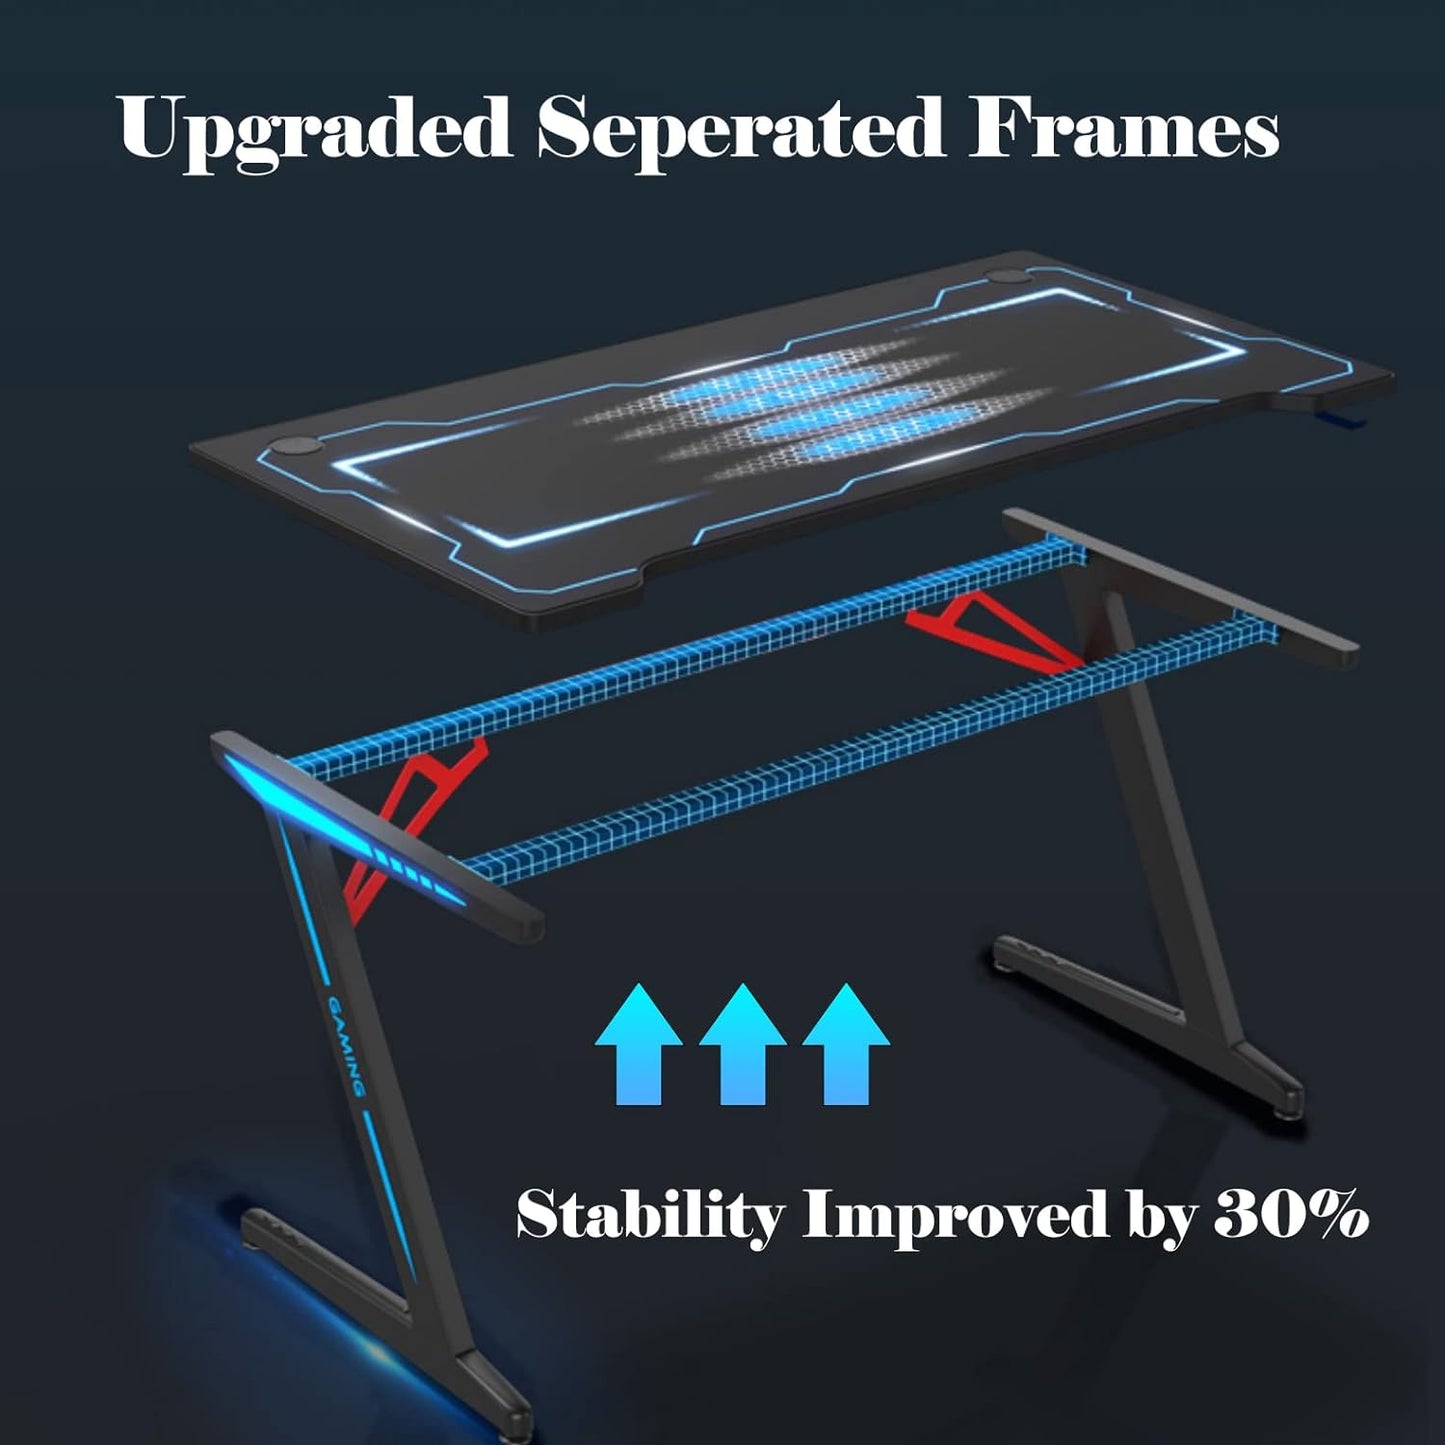 Smilee RGB Gaming Table, Professional Computer Desk with Carbon Fiber Surface, Mouse Pad, Headphone Hook and Cup Holder, 120x60cm